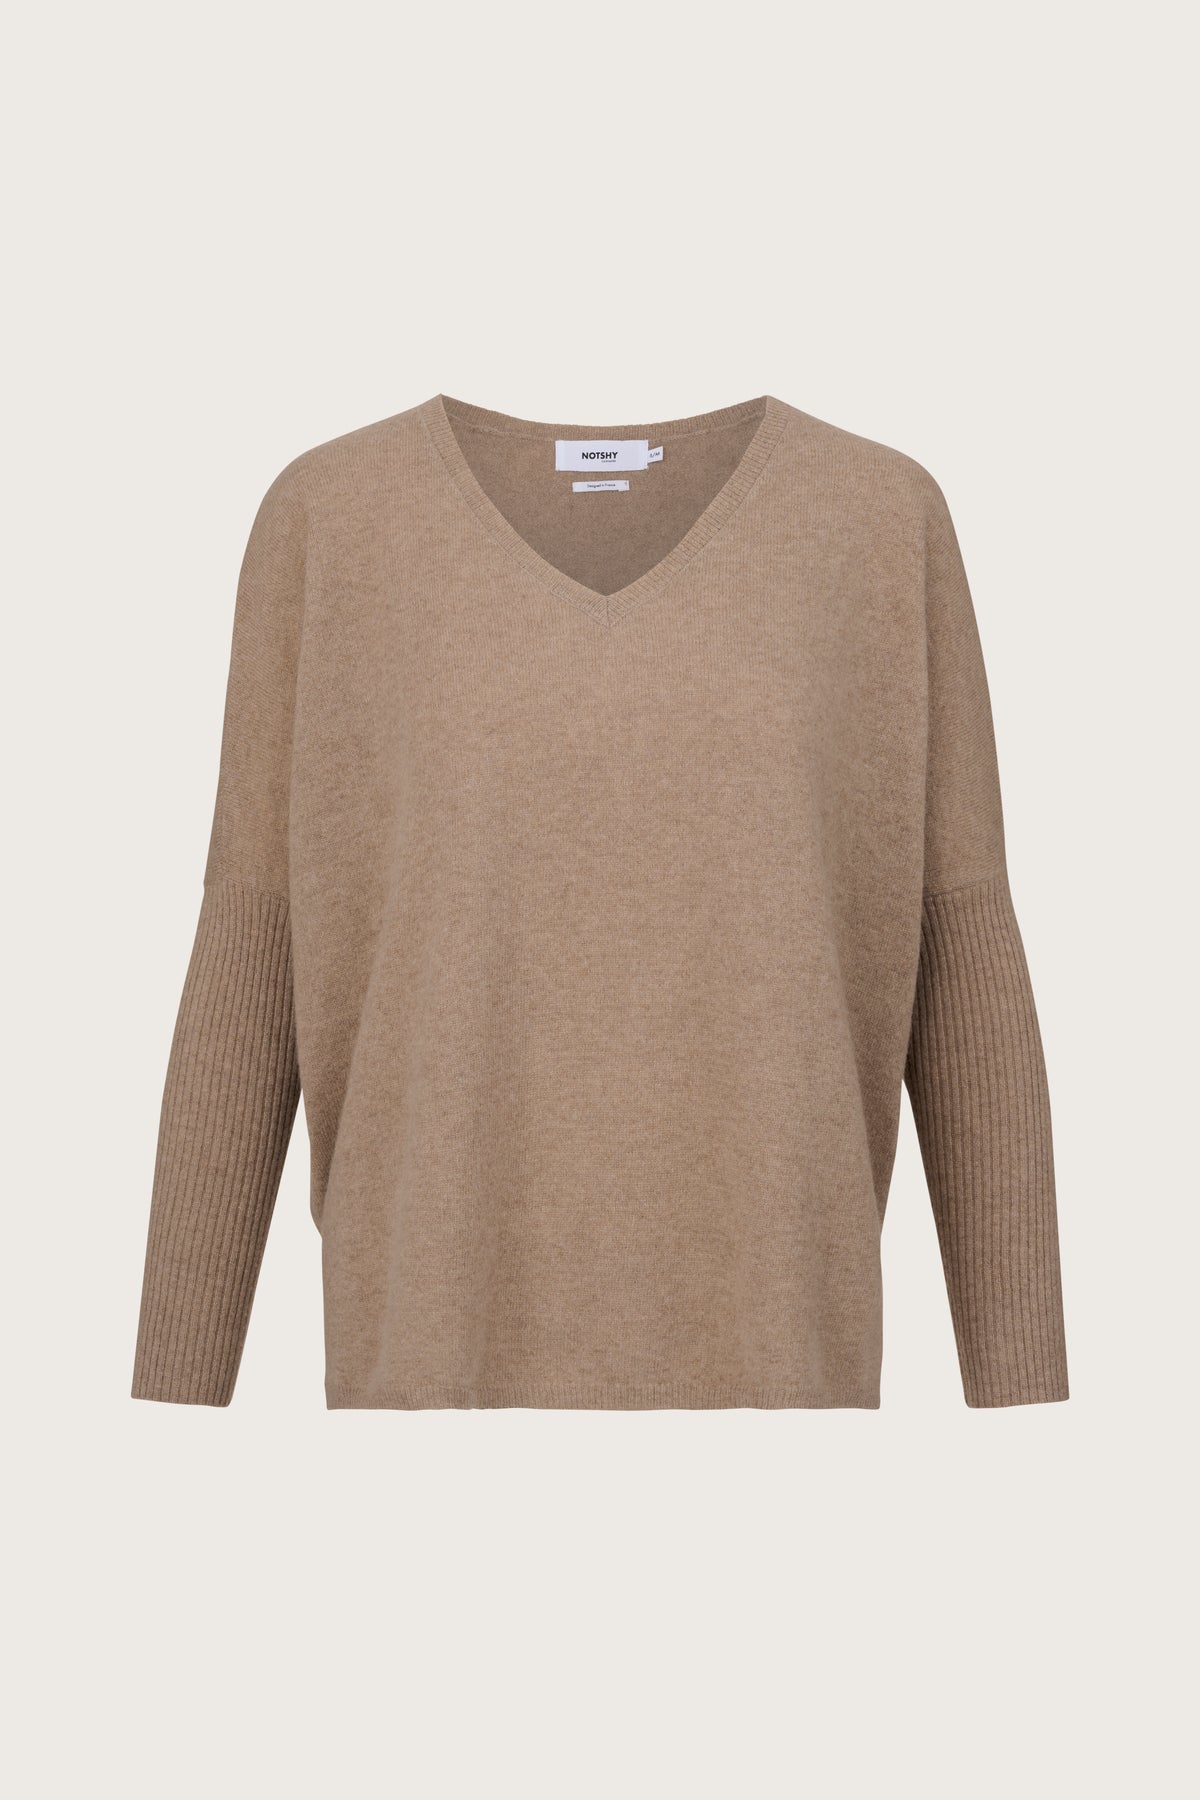 Beige V neck jumper with dropped sleeves and ribbed sleeves